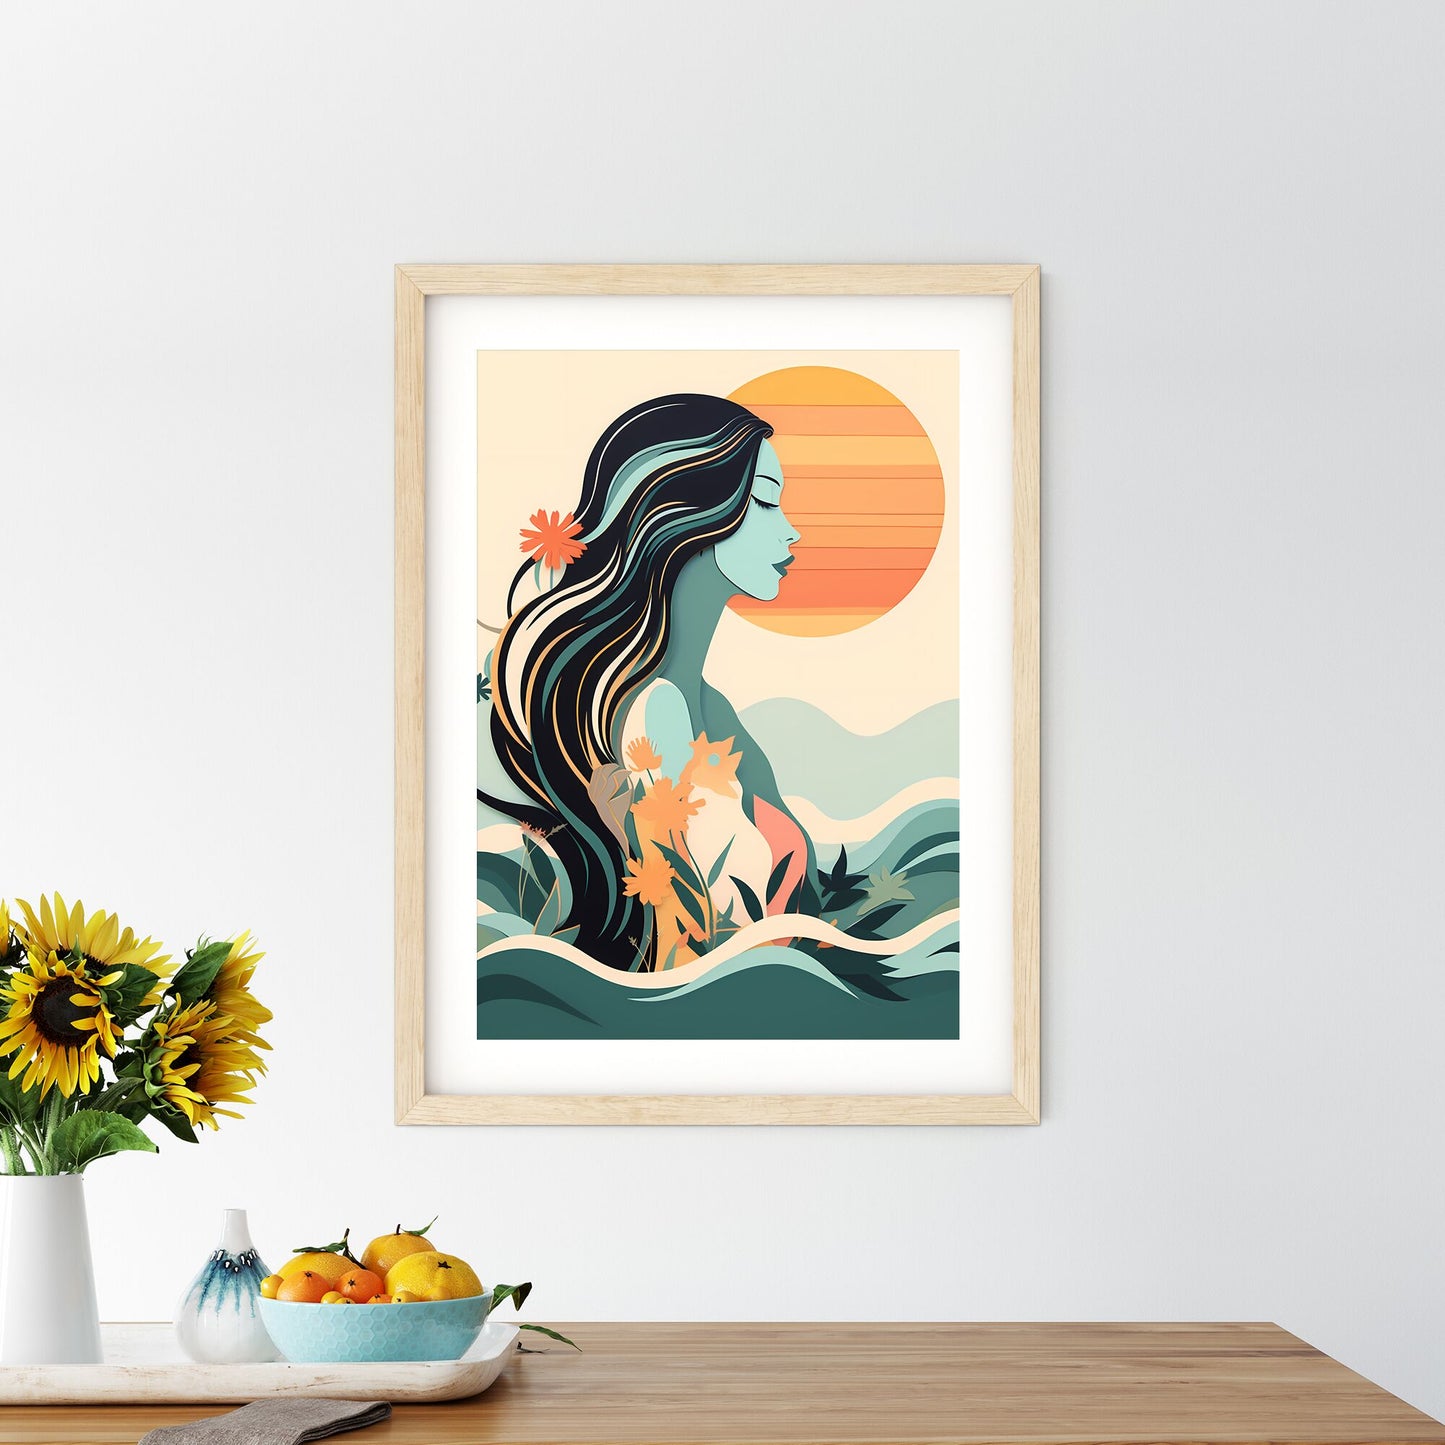 Woman With Long Hair And Flowers In Front Of The Sun Art Print Default Title